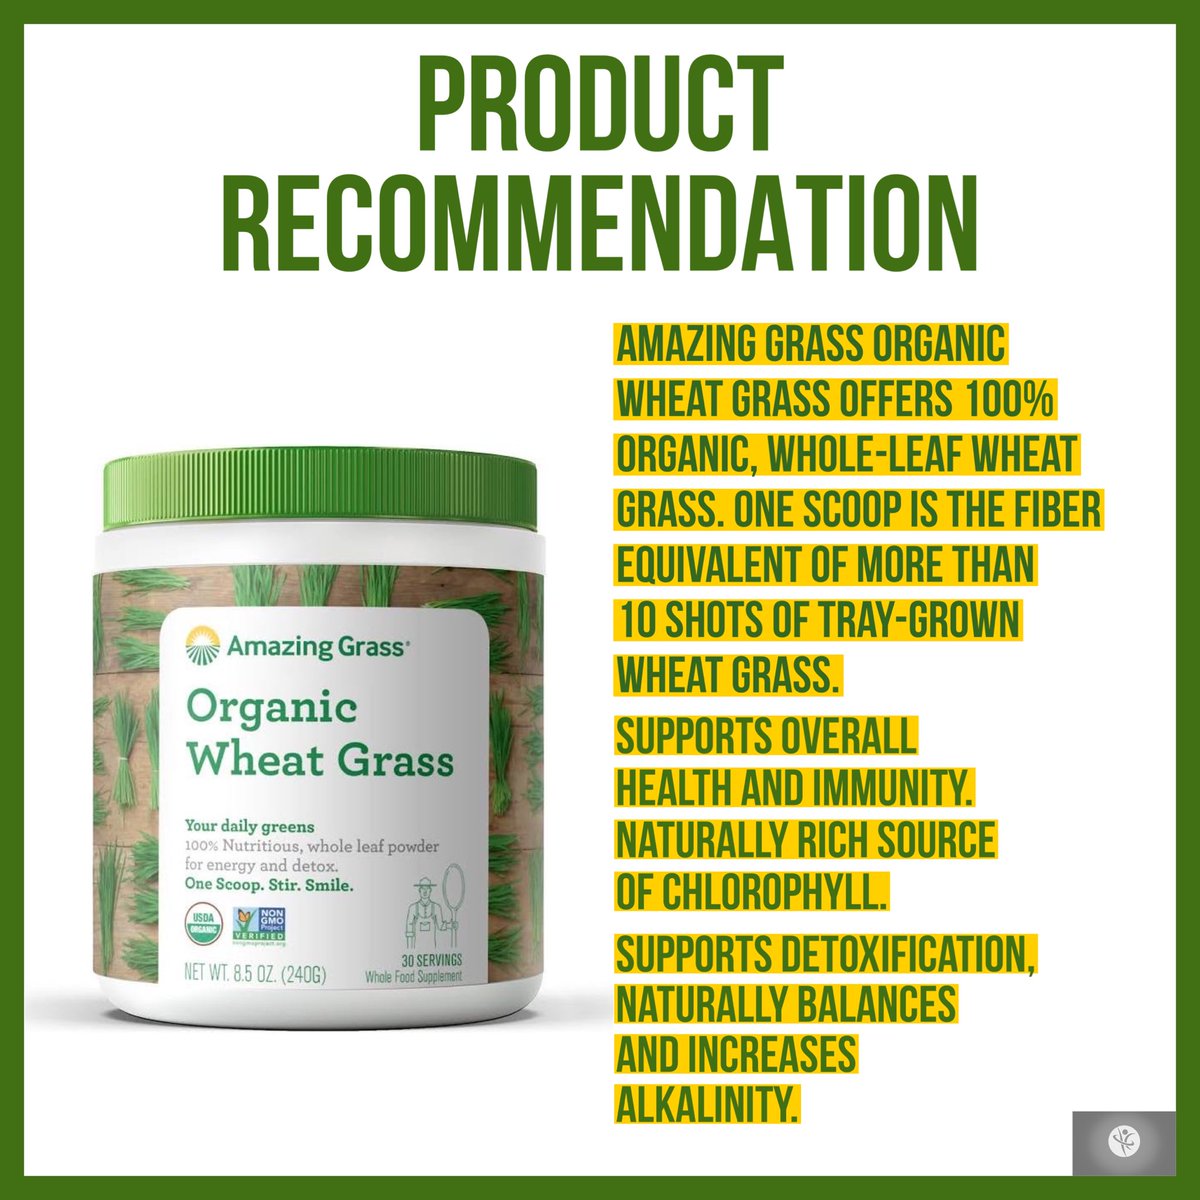 Thankful & Blessed Day! Thank you, CM/Project Health & Wellness, LLC #wheatgrass #productrecommendation #nutrition #wheatgrassshot #healthandwellness #wheatgrassjuice #healthyfood #motivation #projecthealthandwellness #projecthealthandwellnessllc